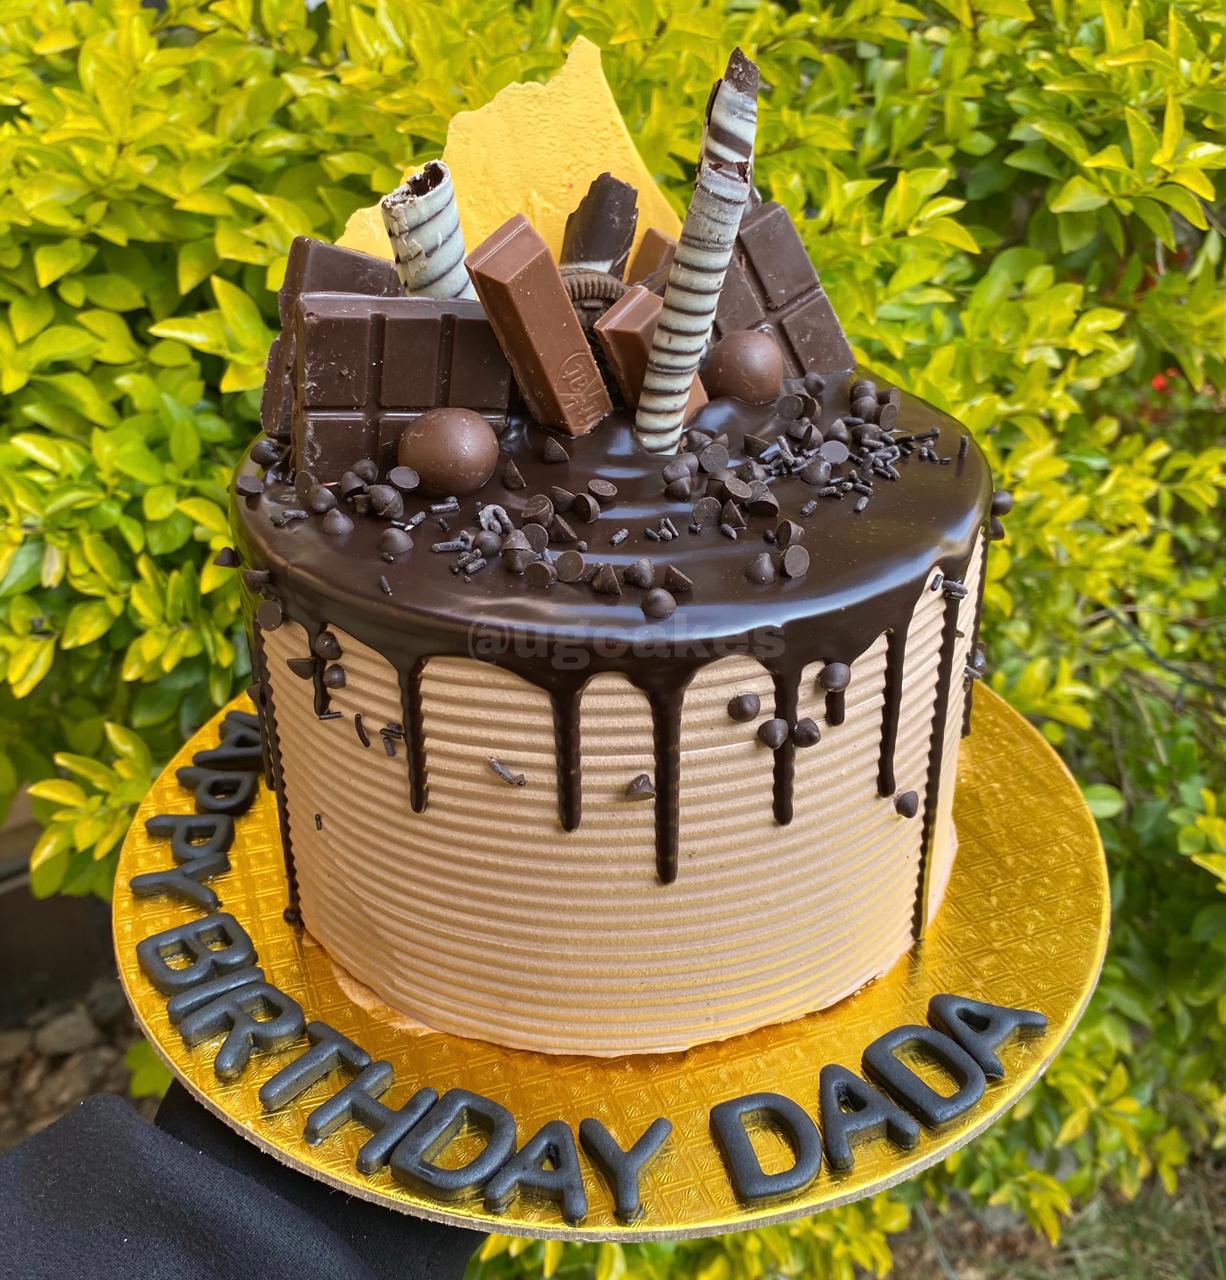 No 1 Online Cake Delivery In Nagpur, Price 349Rs | Send Cake In Nagpur -  Kekmart